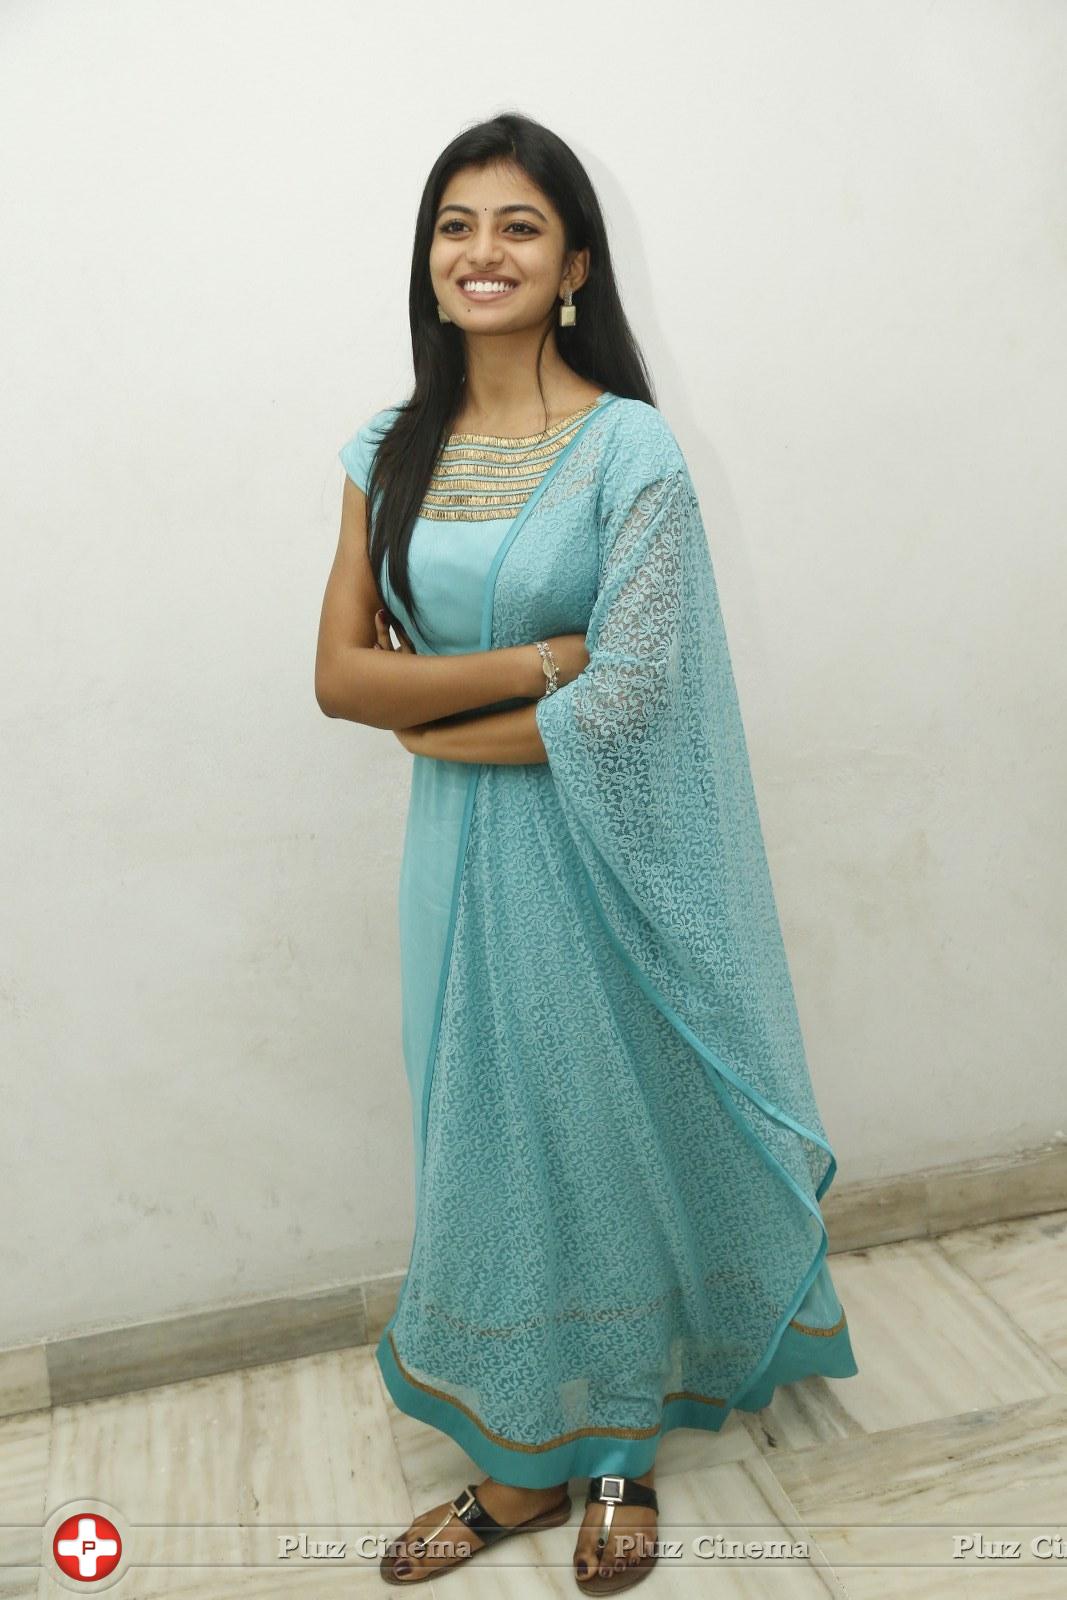 Actress Anandhi Cute Gallery | Picture 1073171